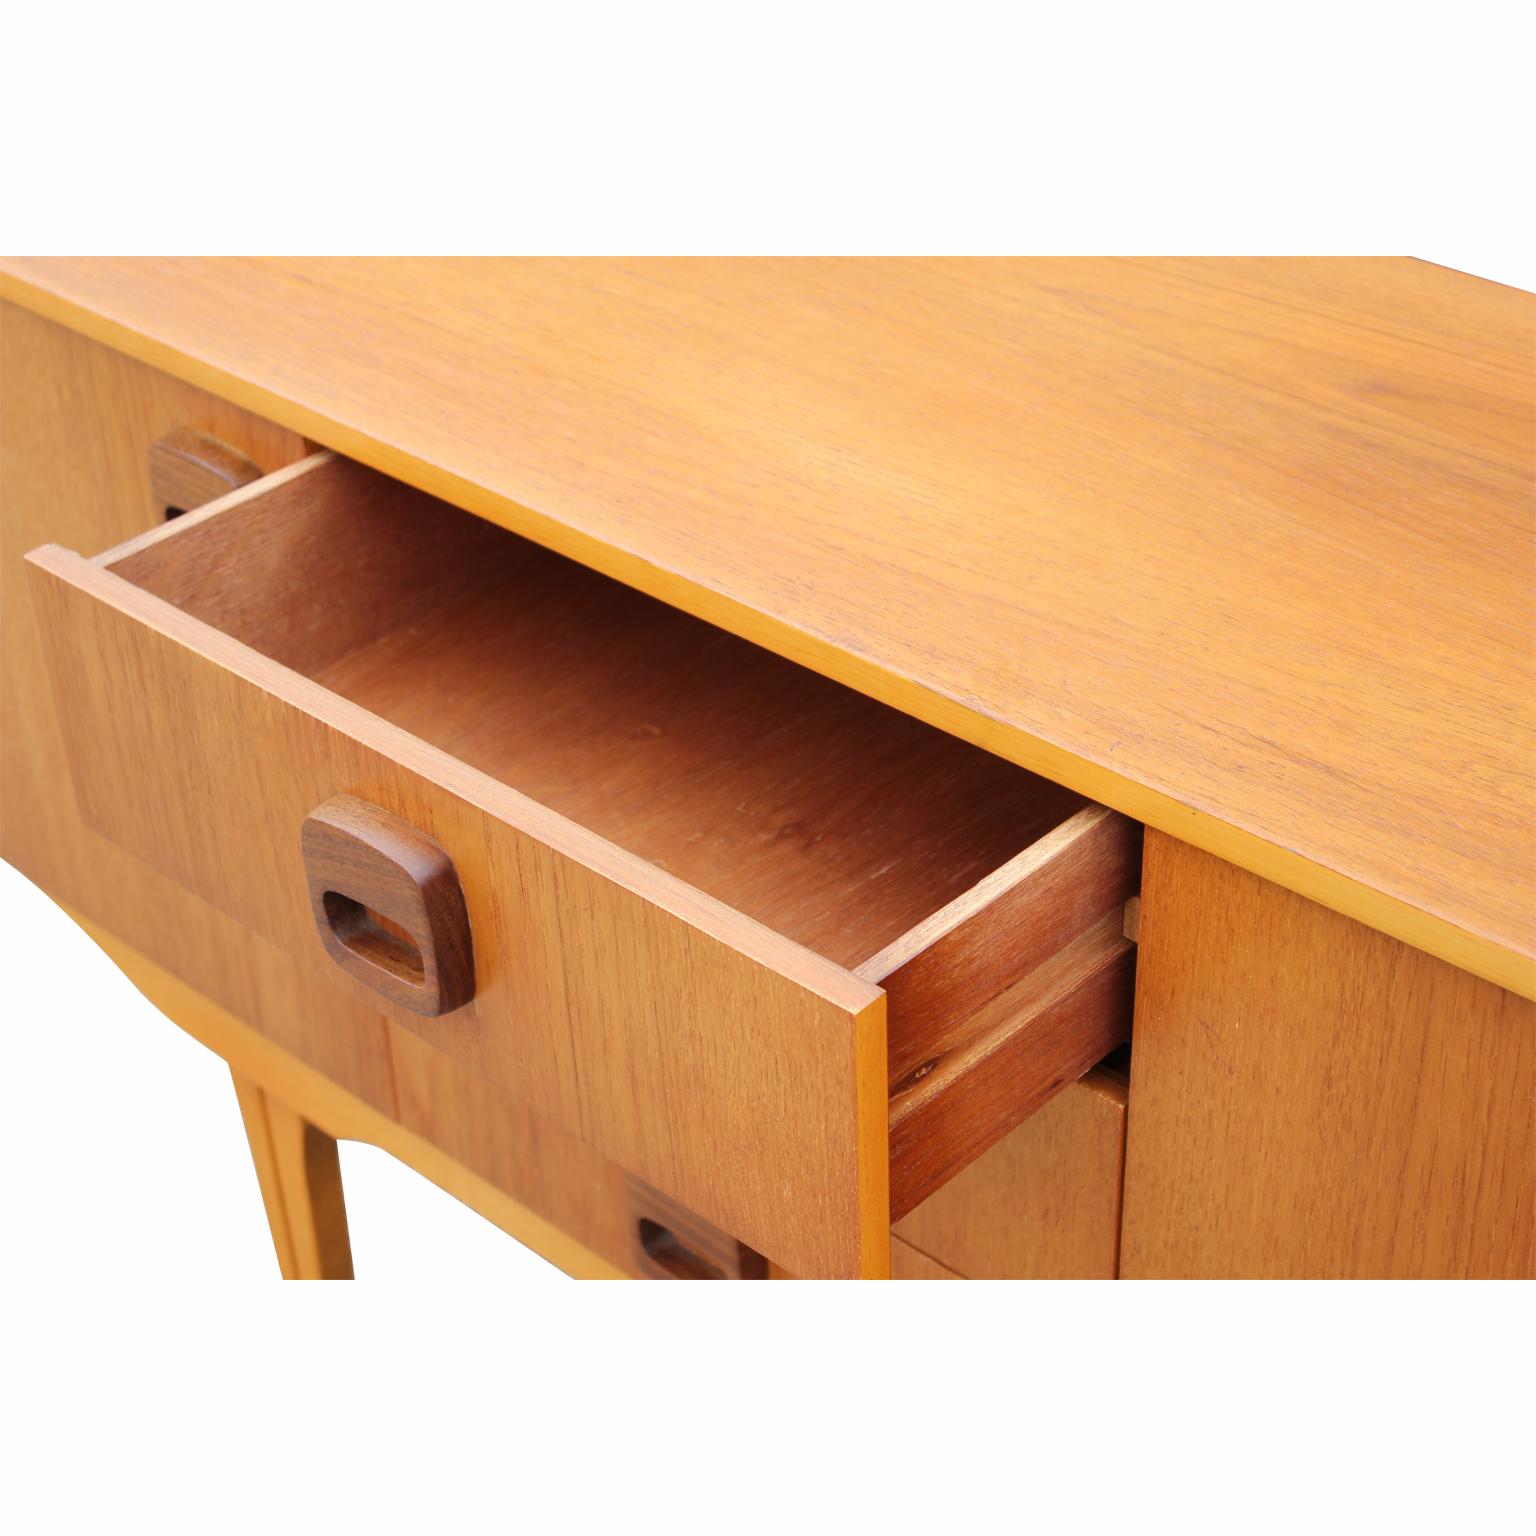 Mid-Century Modern Danish Style Teak Sideboard or Credenza with Wooden Handles 2